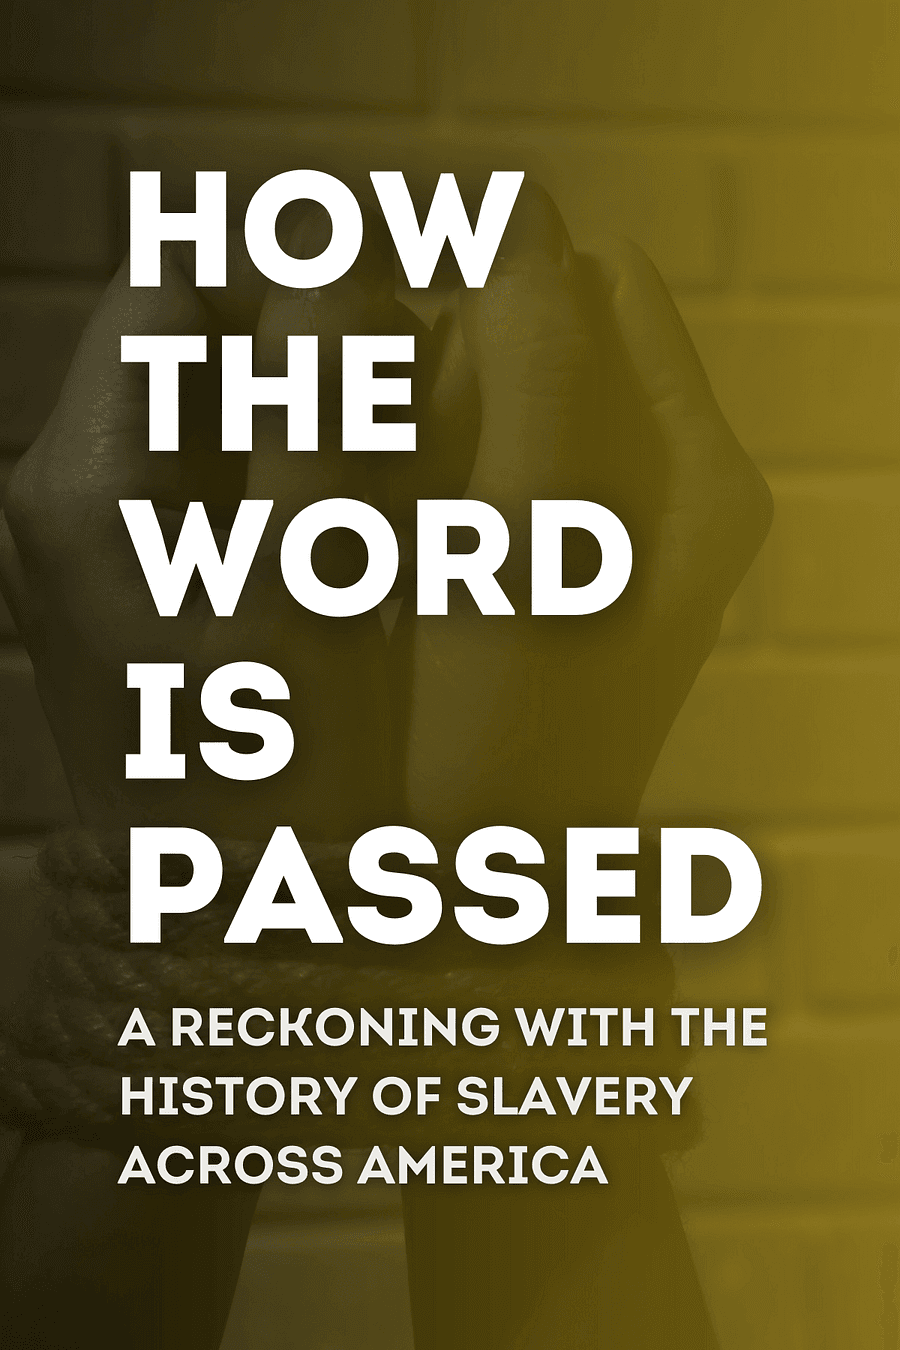 How the Word Is Passed by Clint Smith - Book Summary